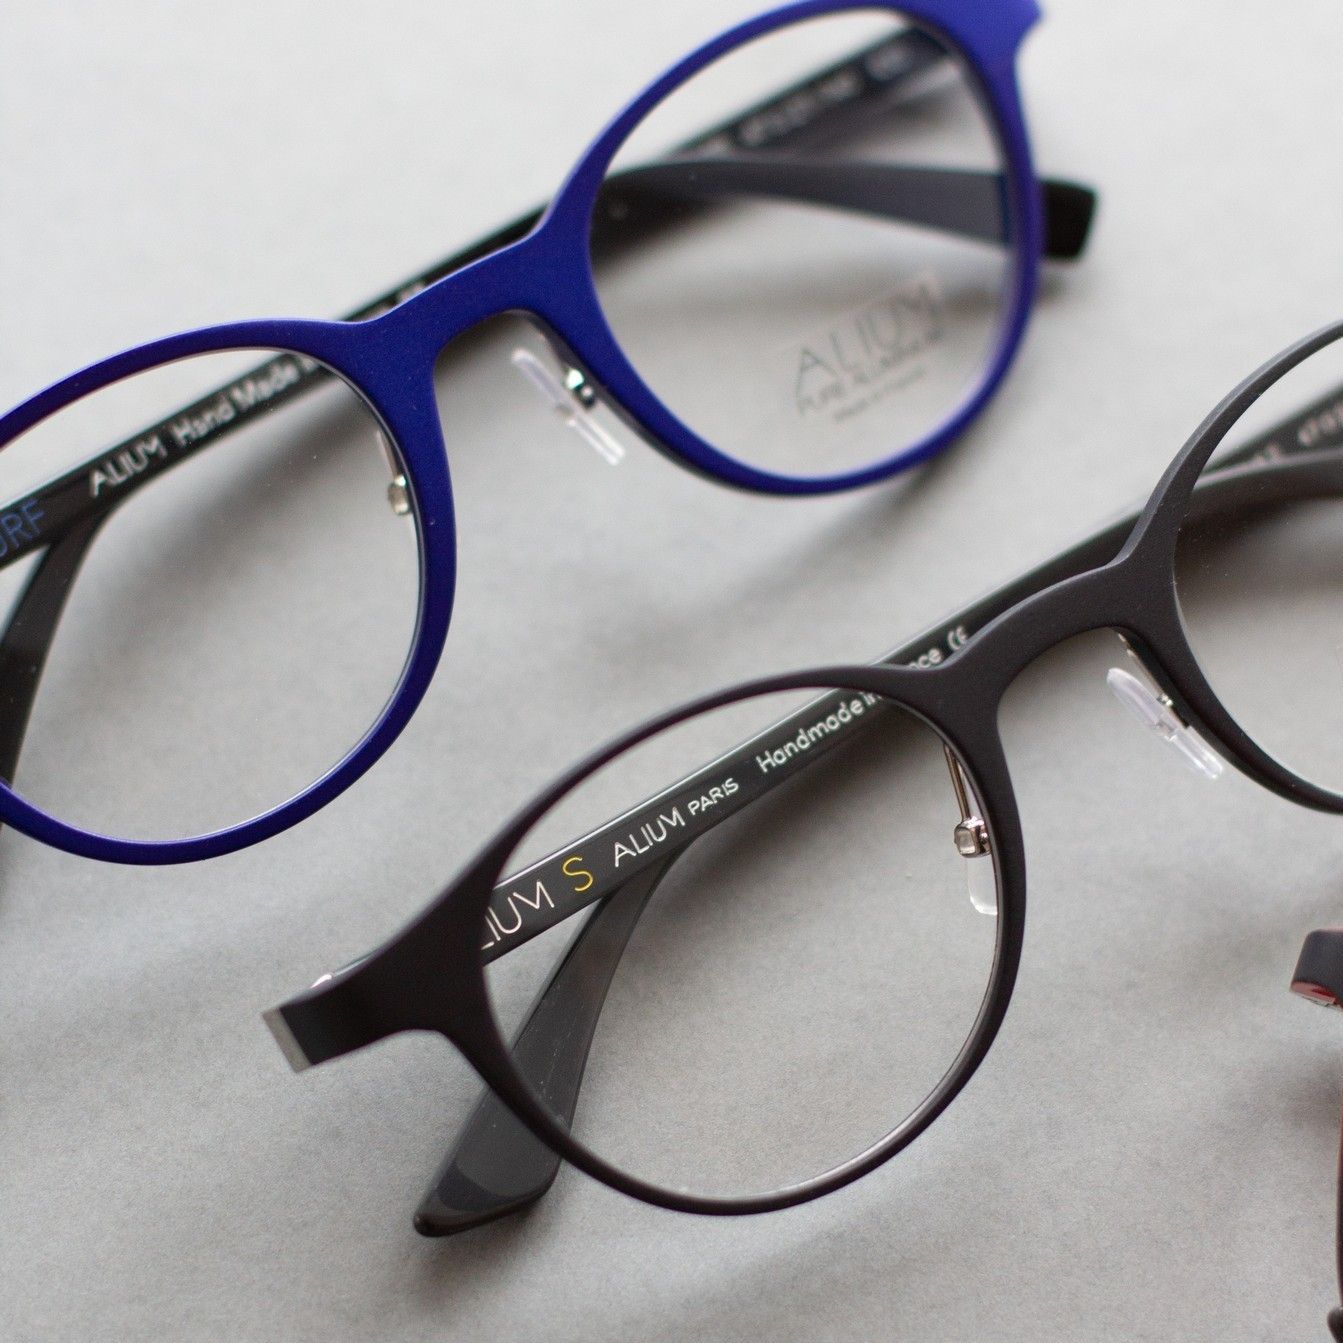 Two ALIUM metal frames, one in blue and one in black